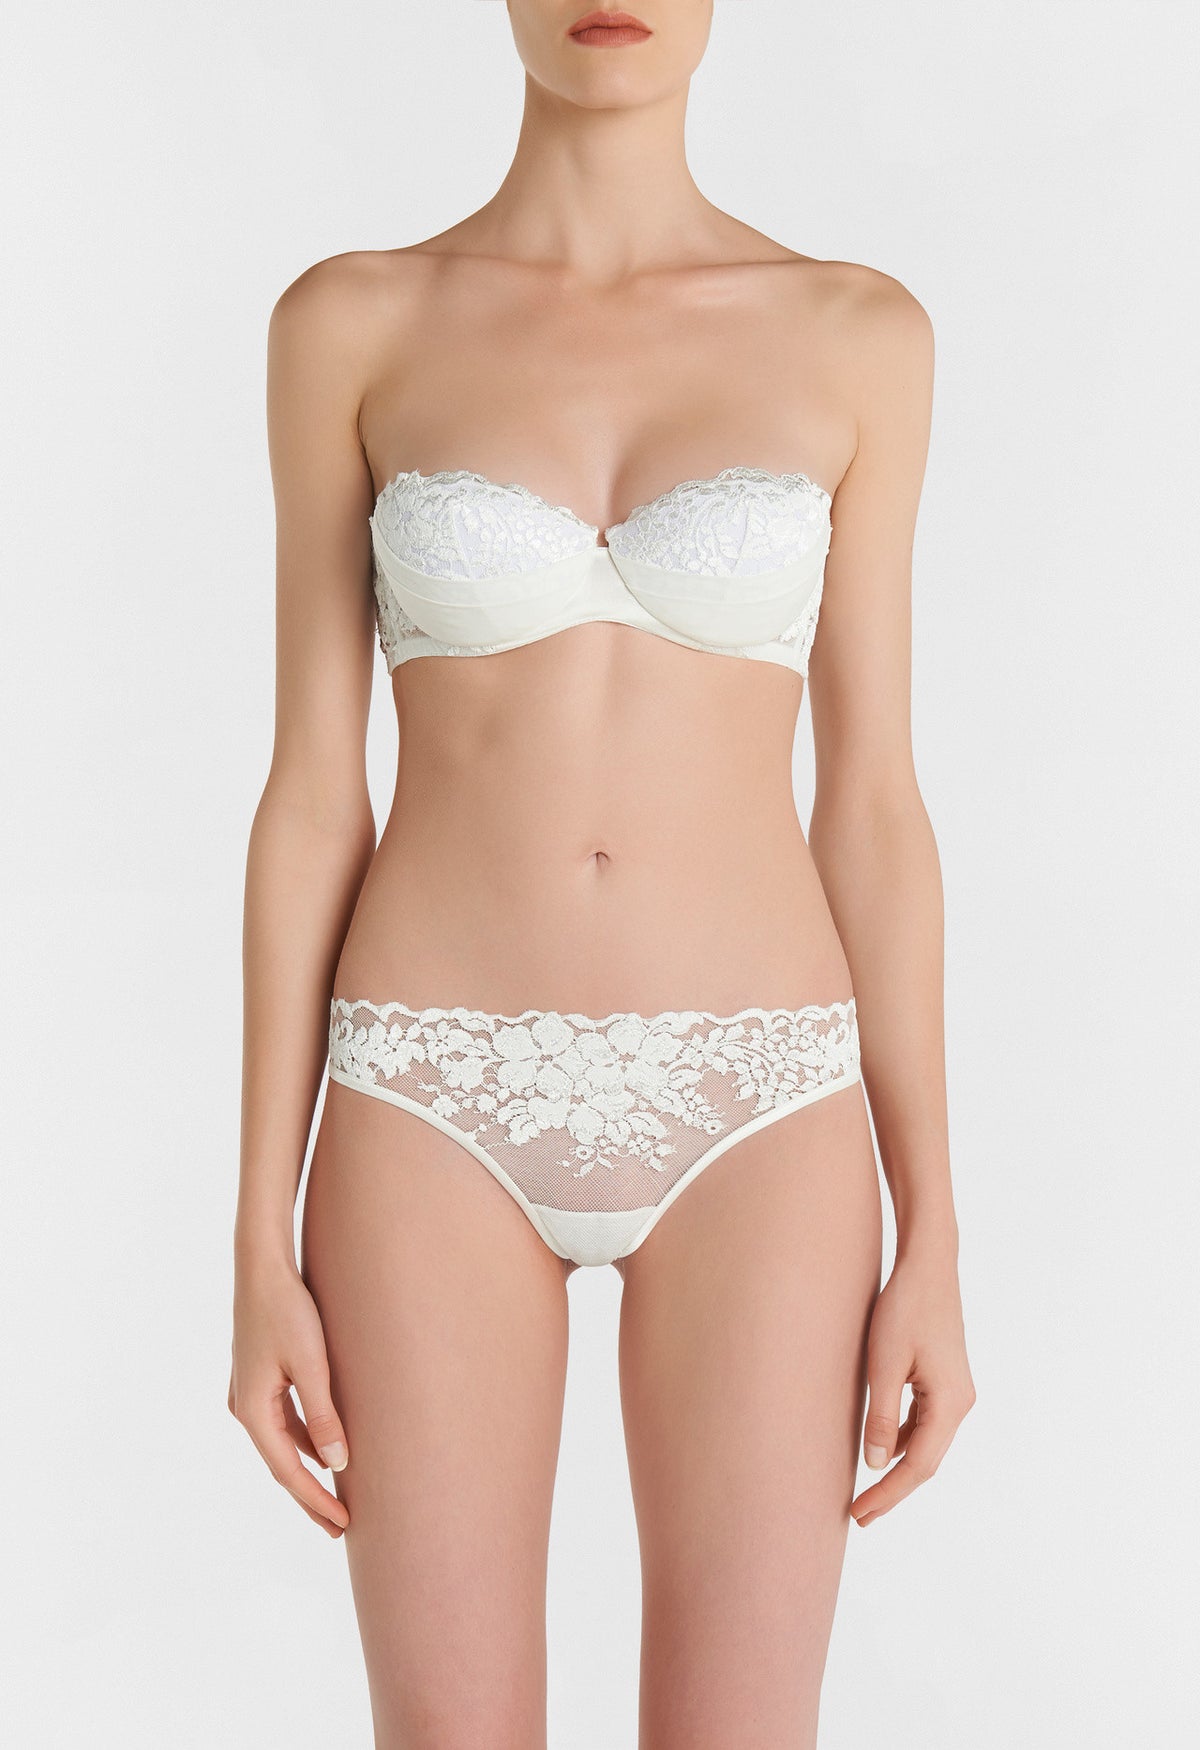 Bandeau Bra in Off White with Cotton Leavers Lace